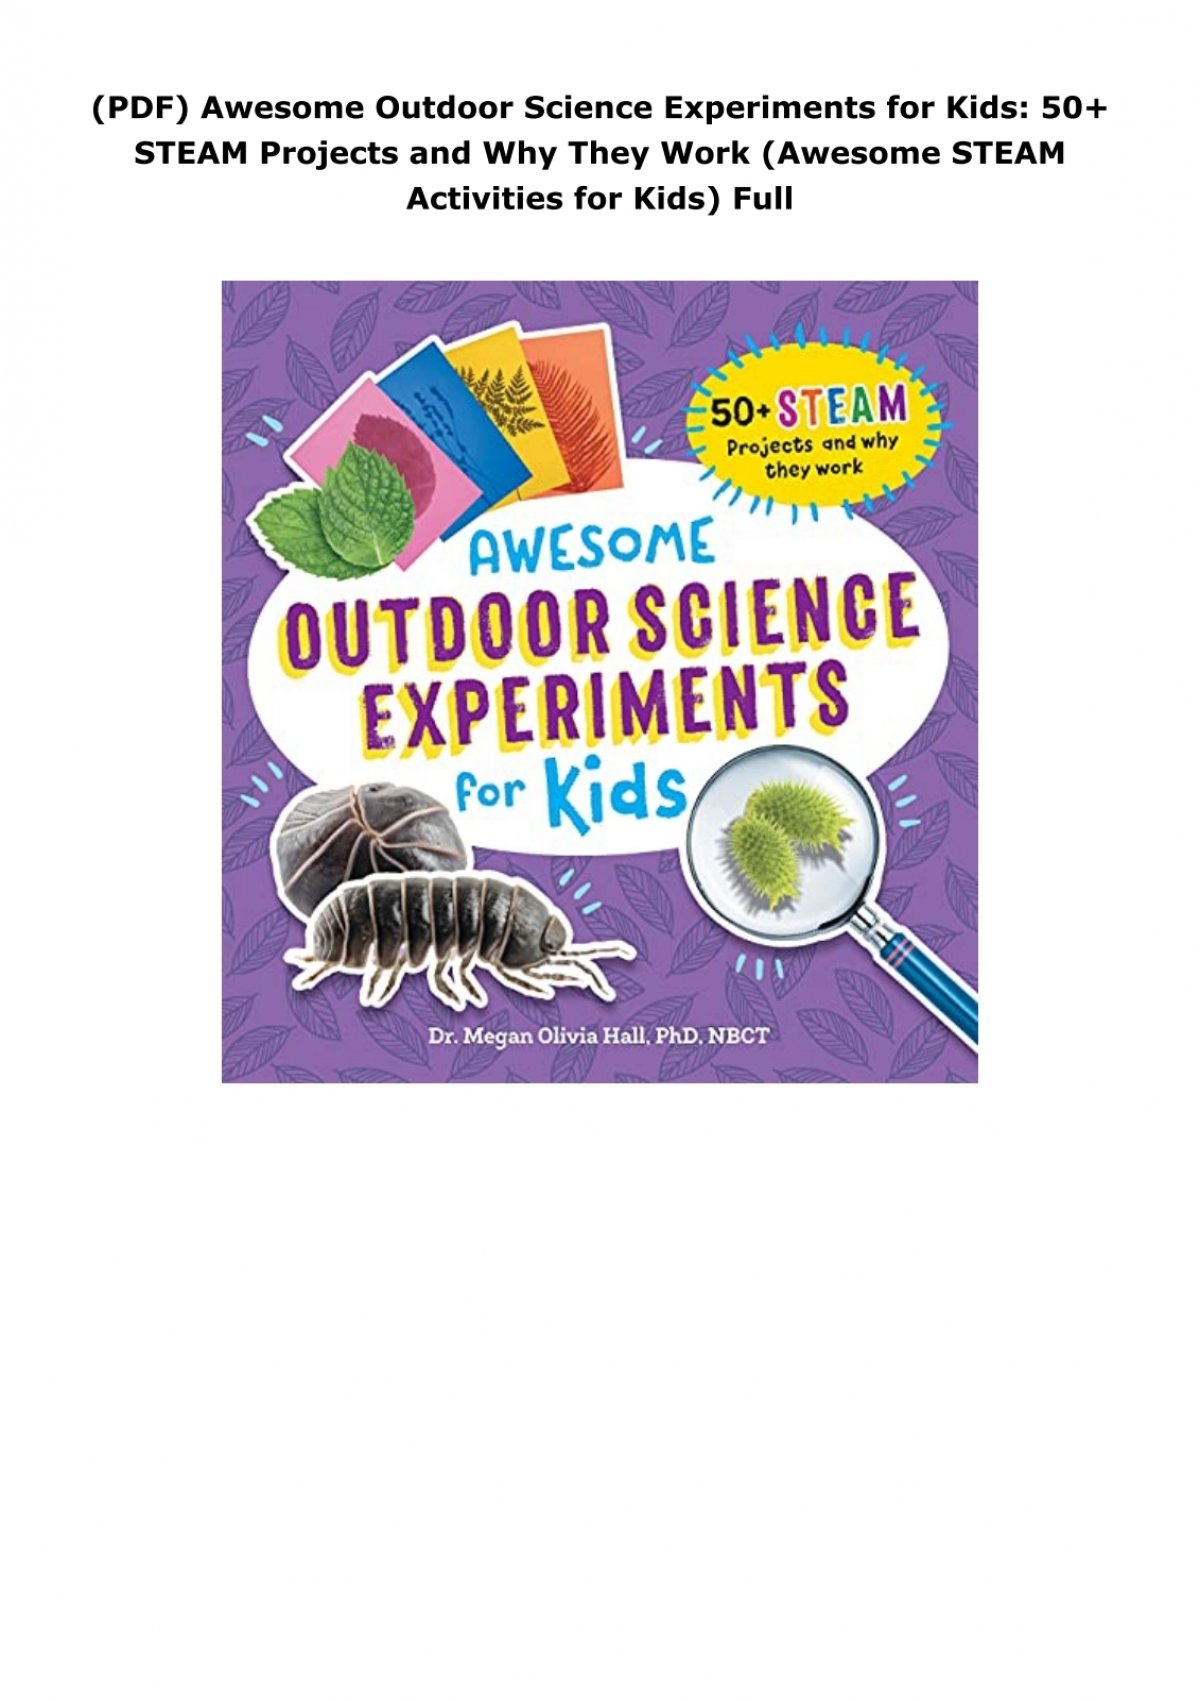 (PDF) Awesome Outdoor Science Experiments for Kids: 50+ STEAM Projects ...